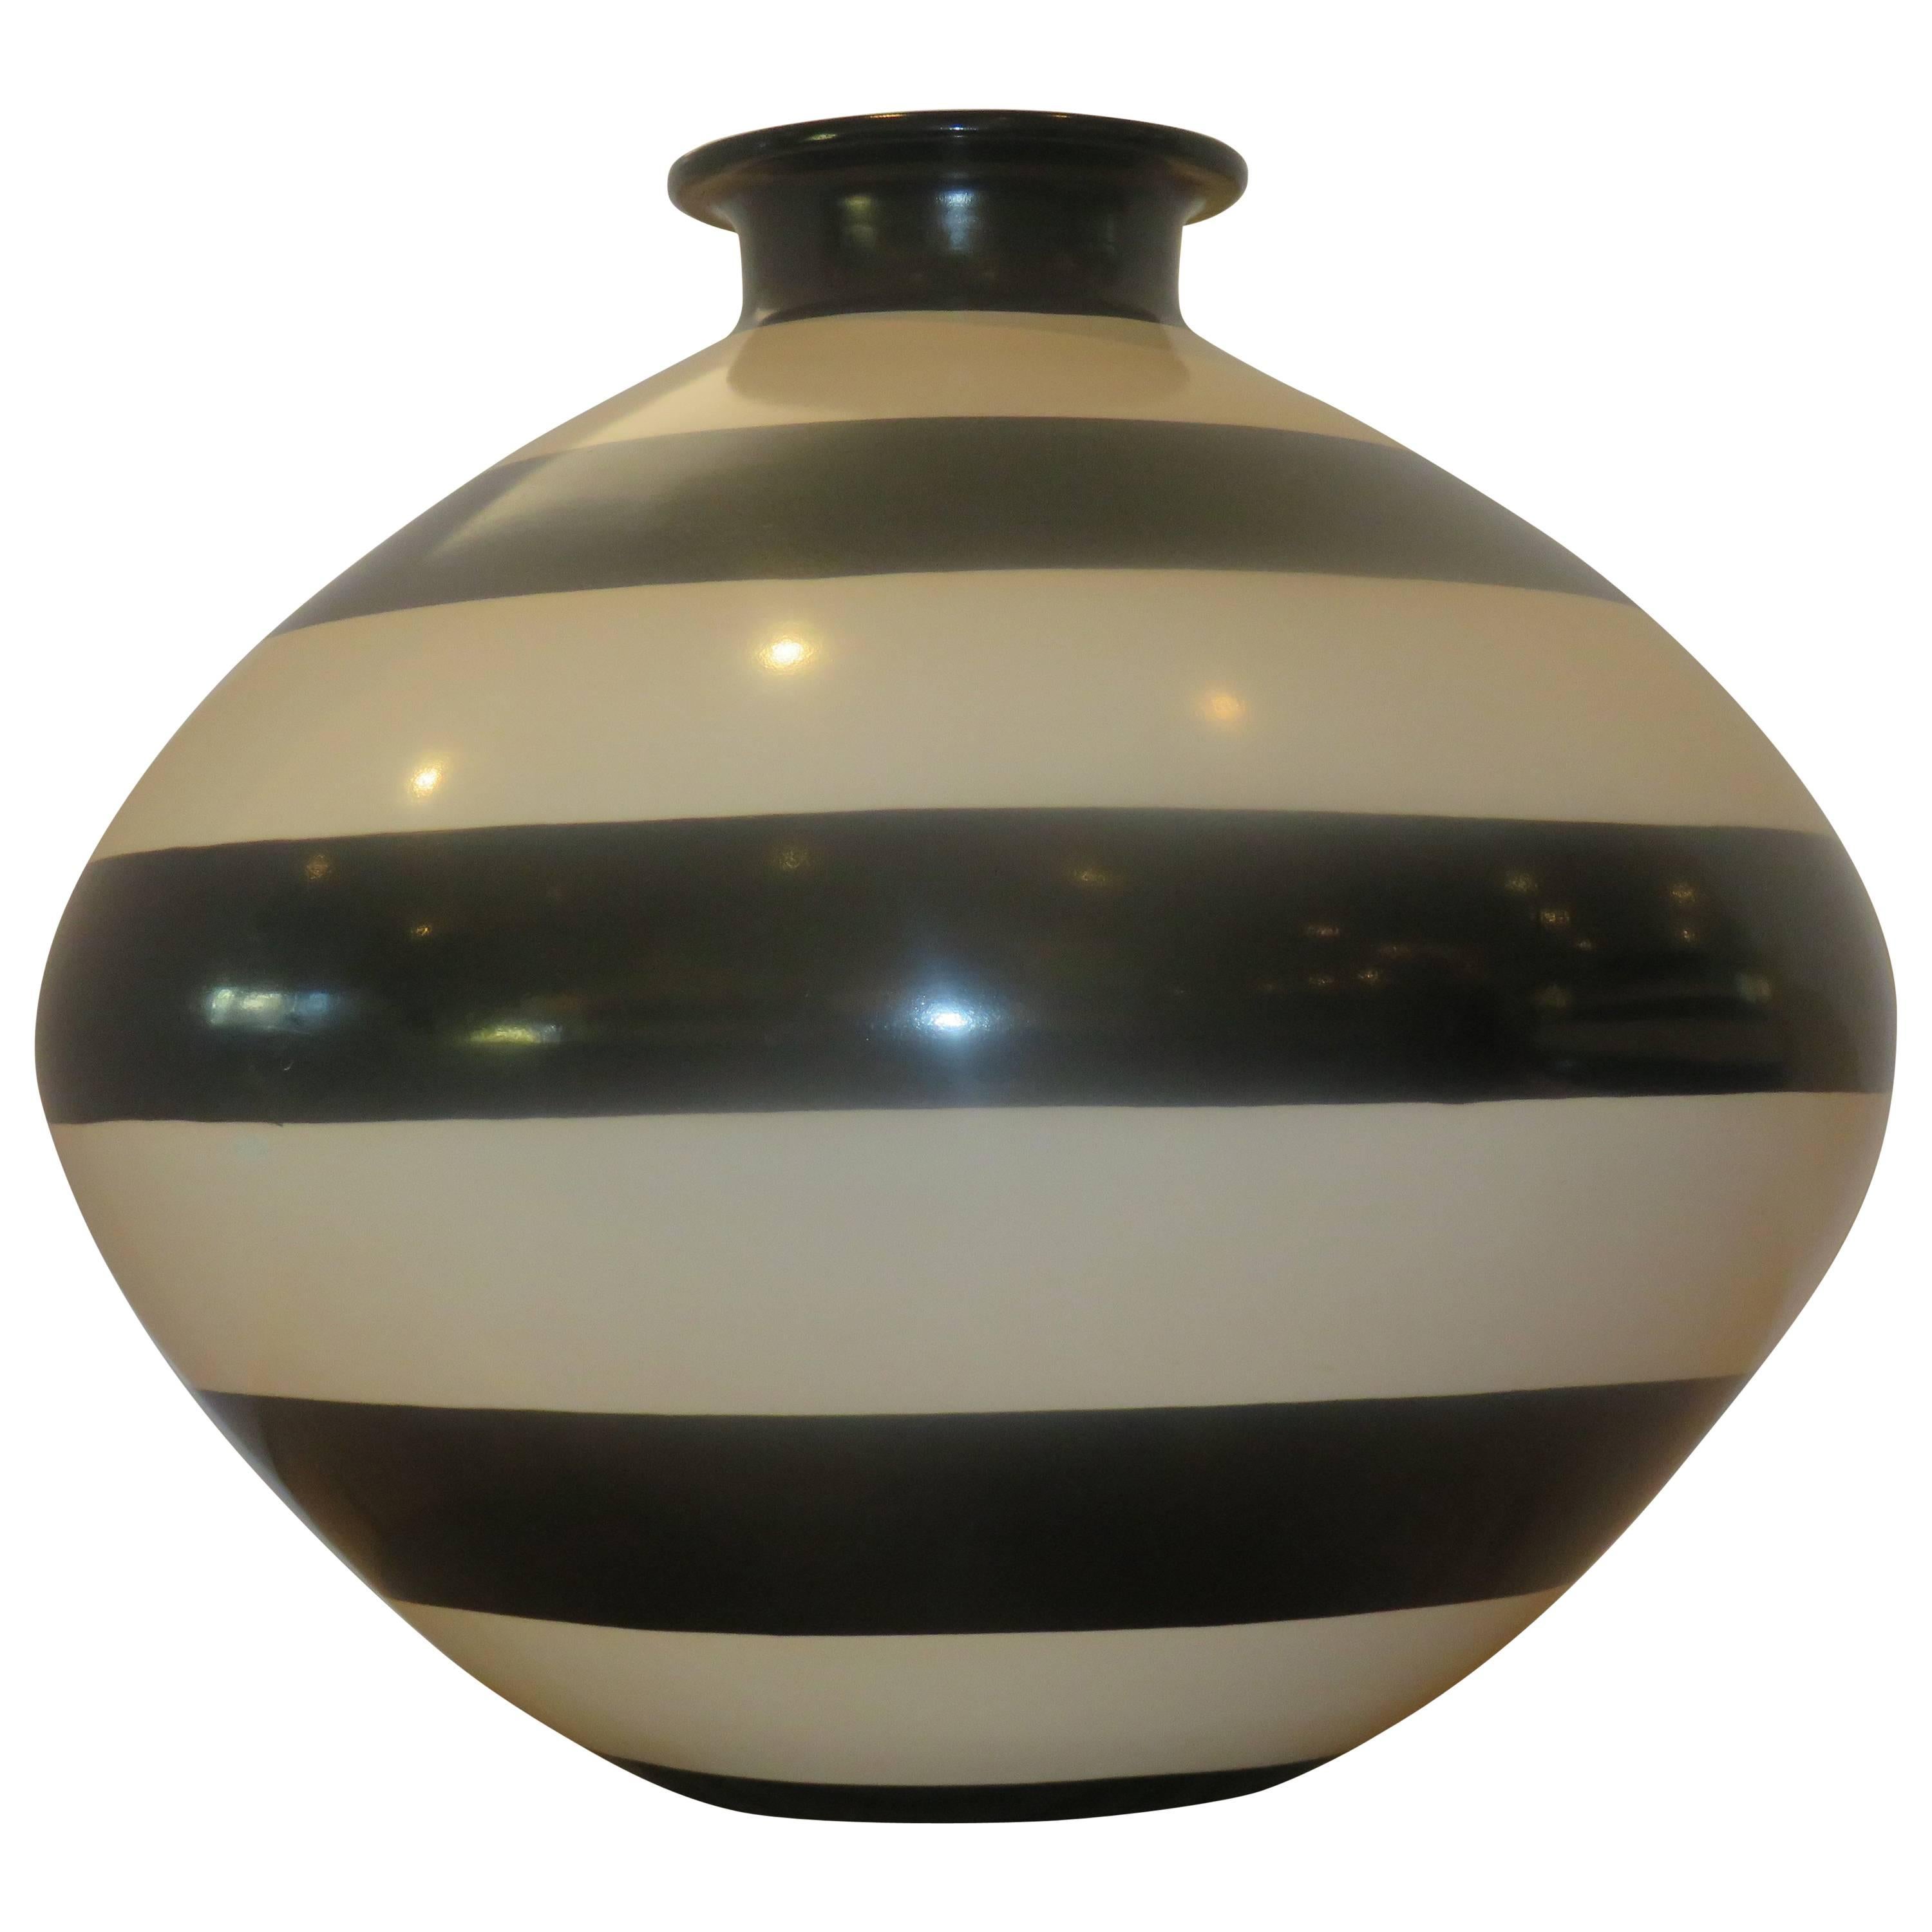 Large Studio Crafted Black and White Vase/Vessel, 1970s